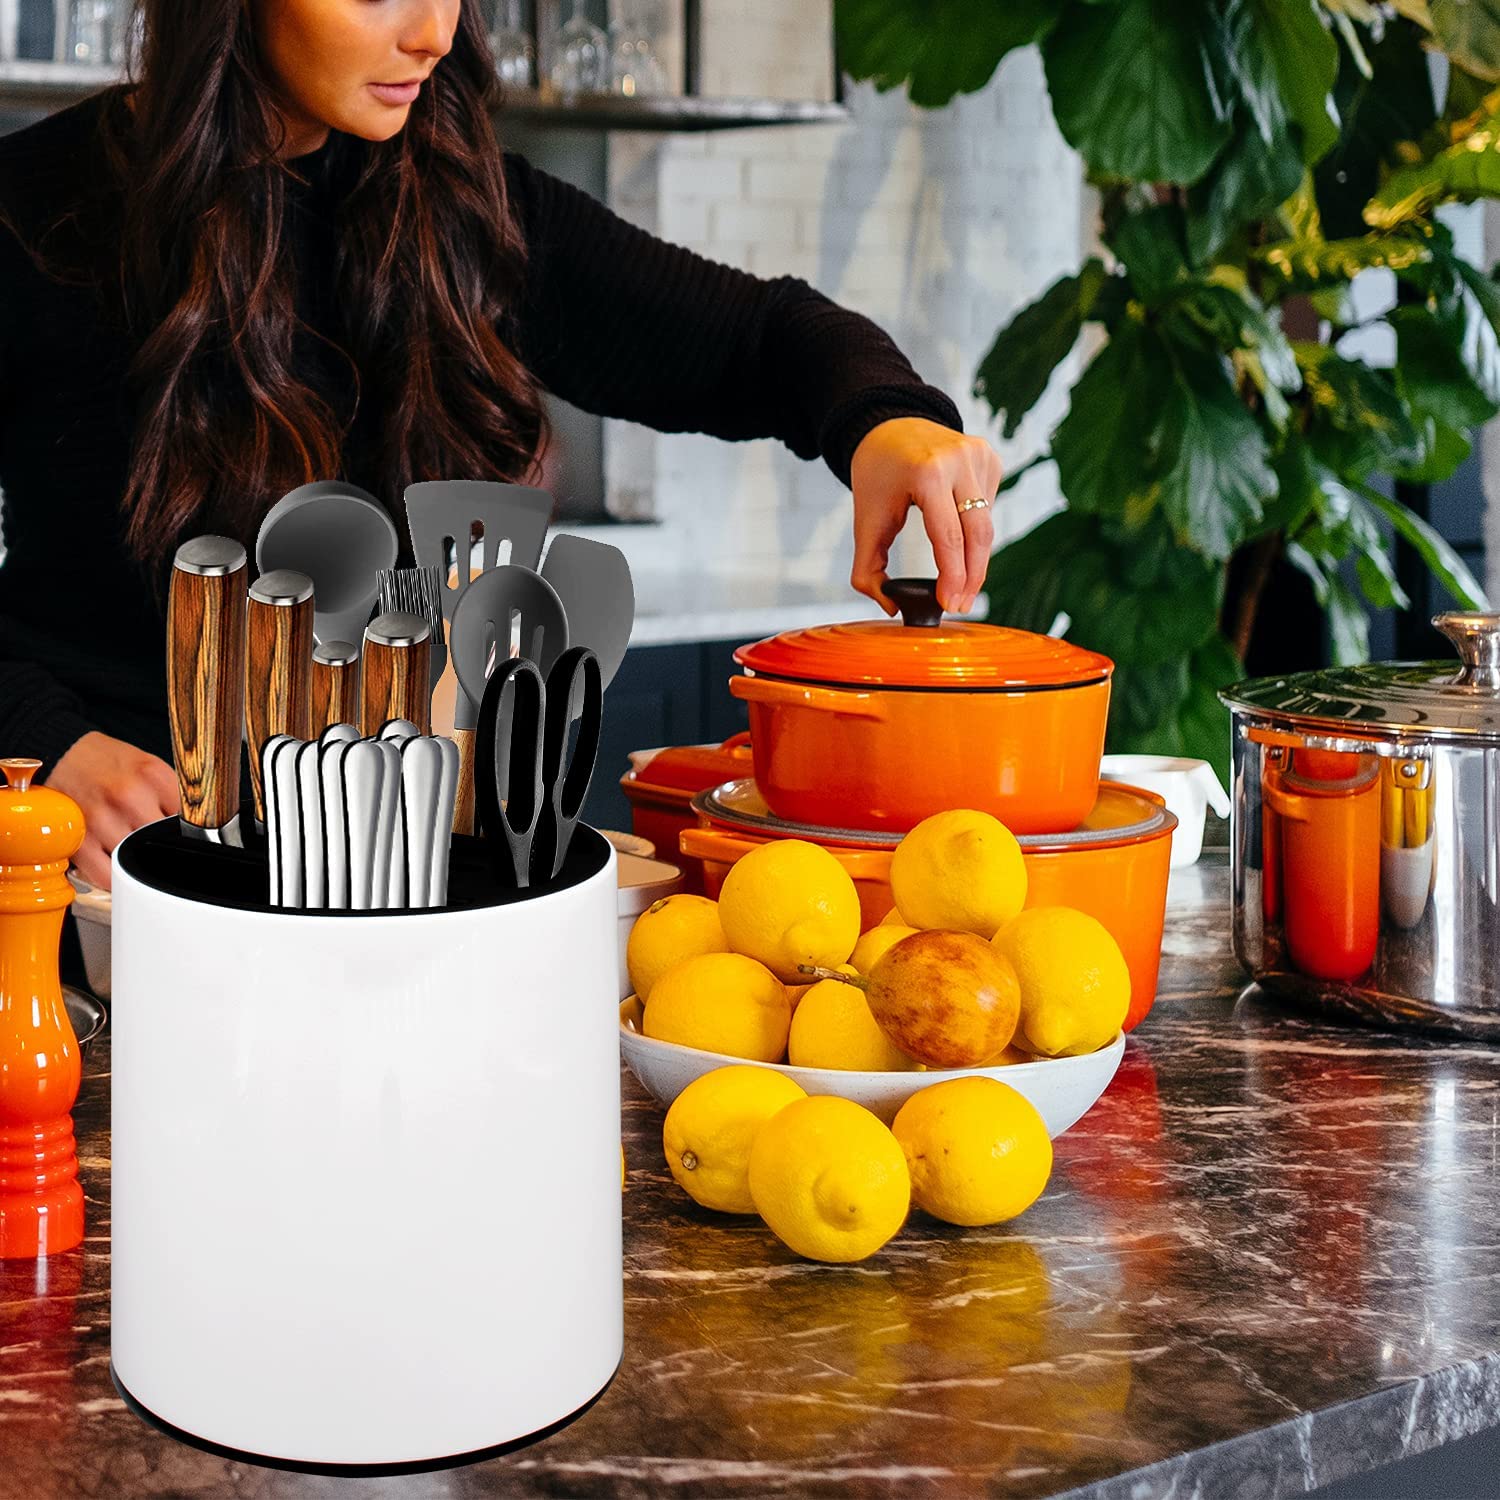 (🌲Early Christmas Sale- SAVE 48% OFF)Rotating Universal Utensil Caddy for Countertop(BUY 2 GET FREE SHIPPING)